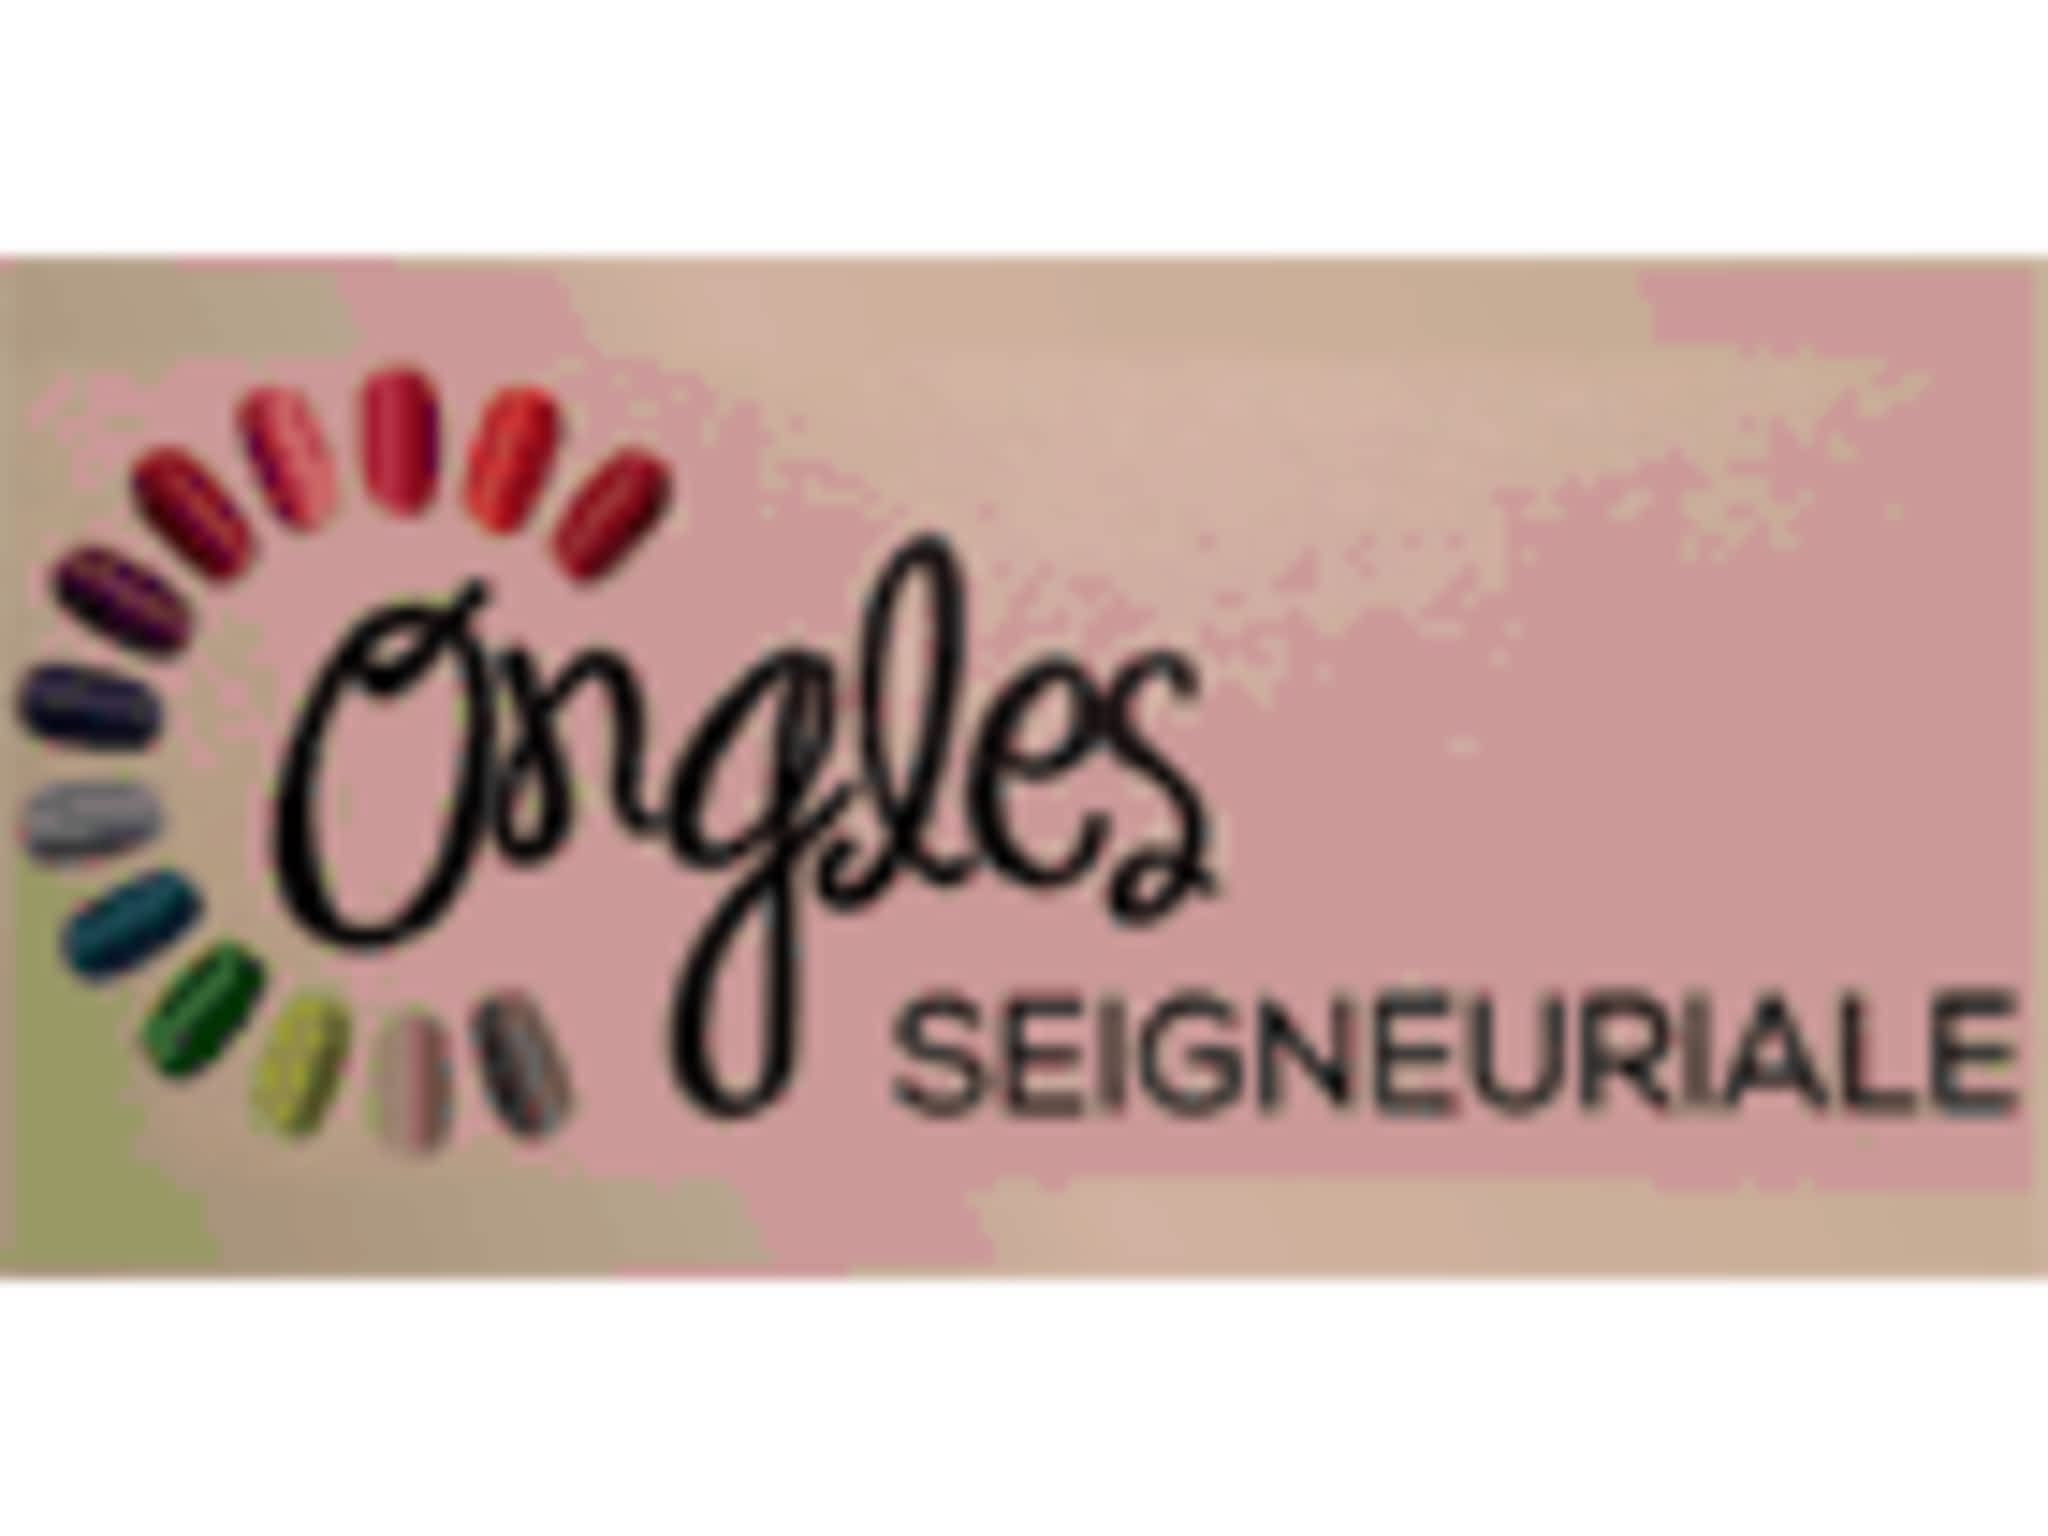 photo Ongles Seigneuriale